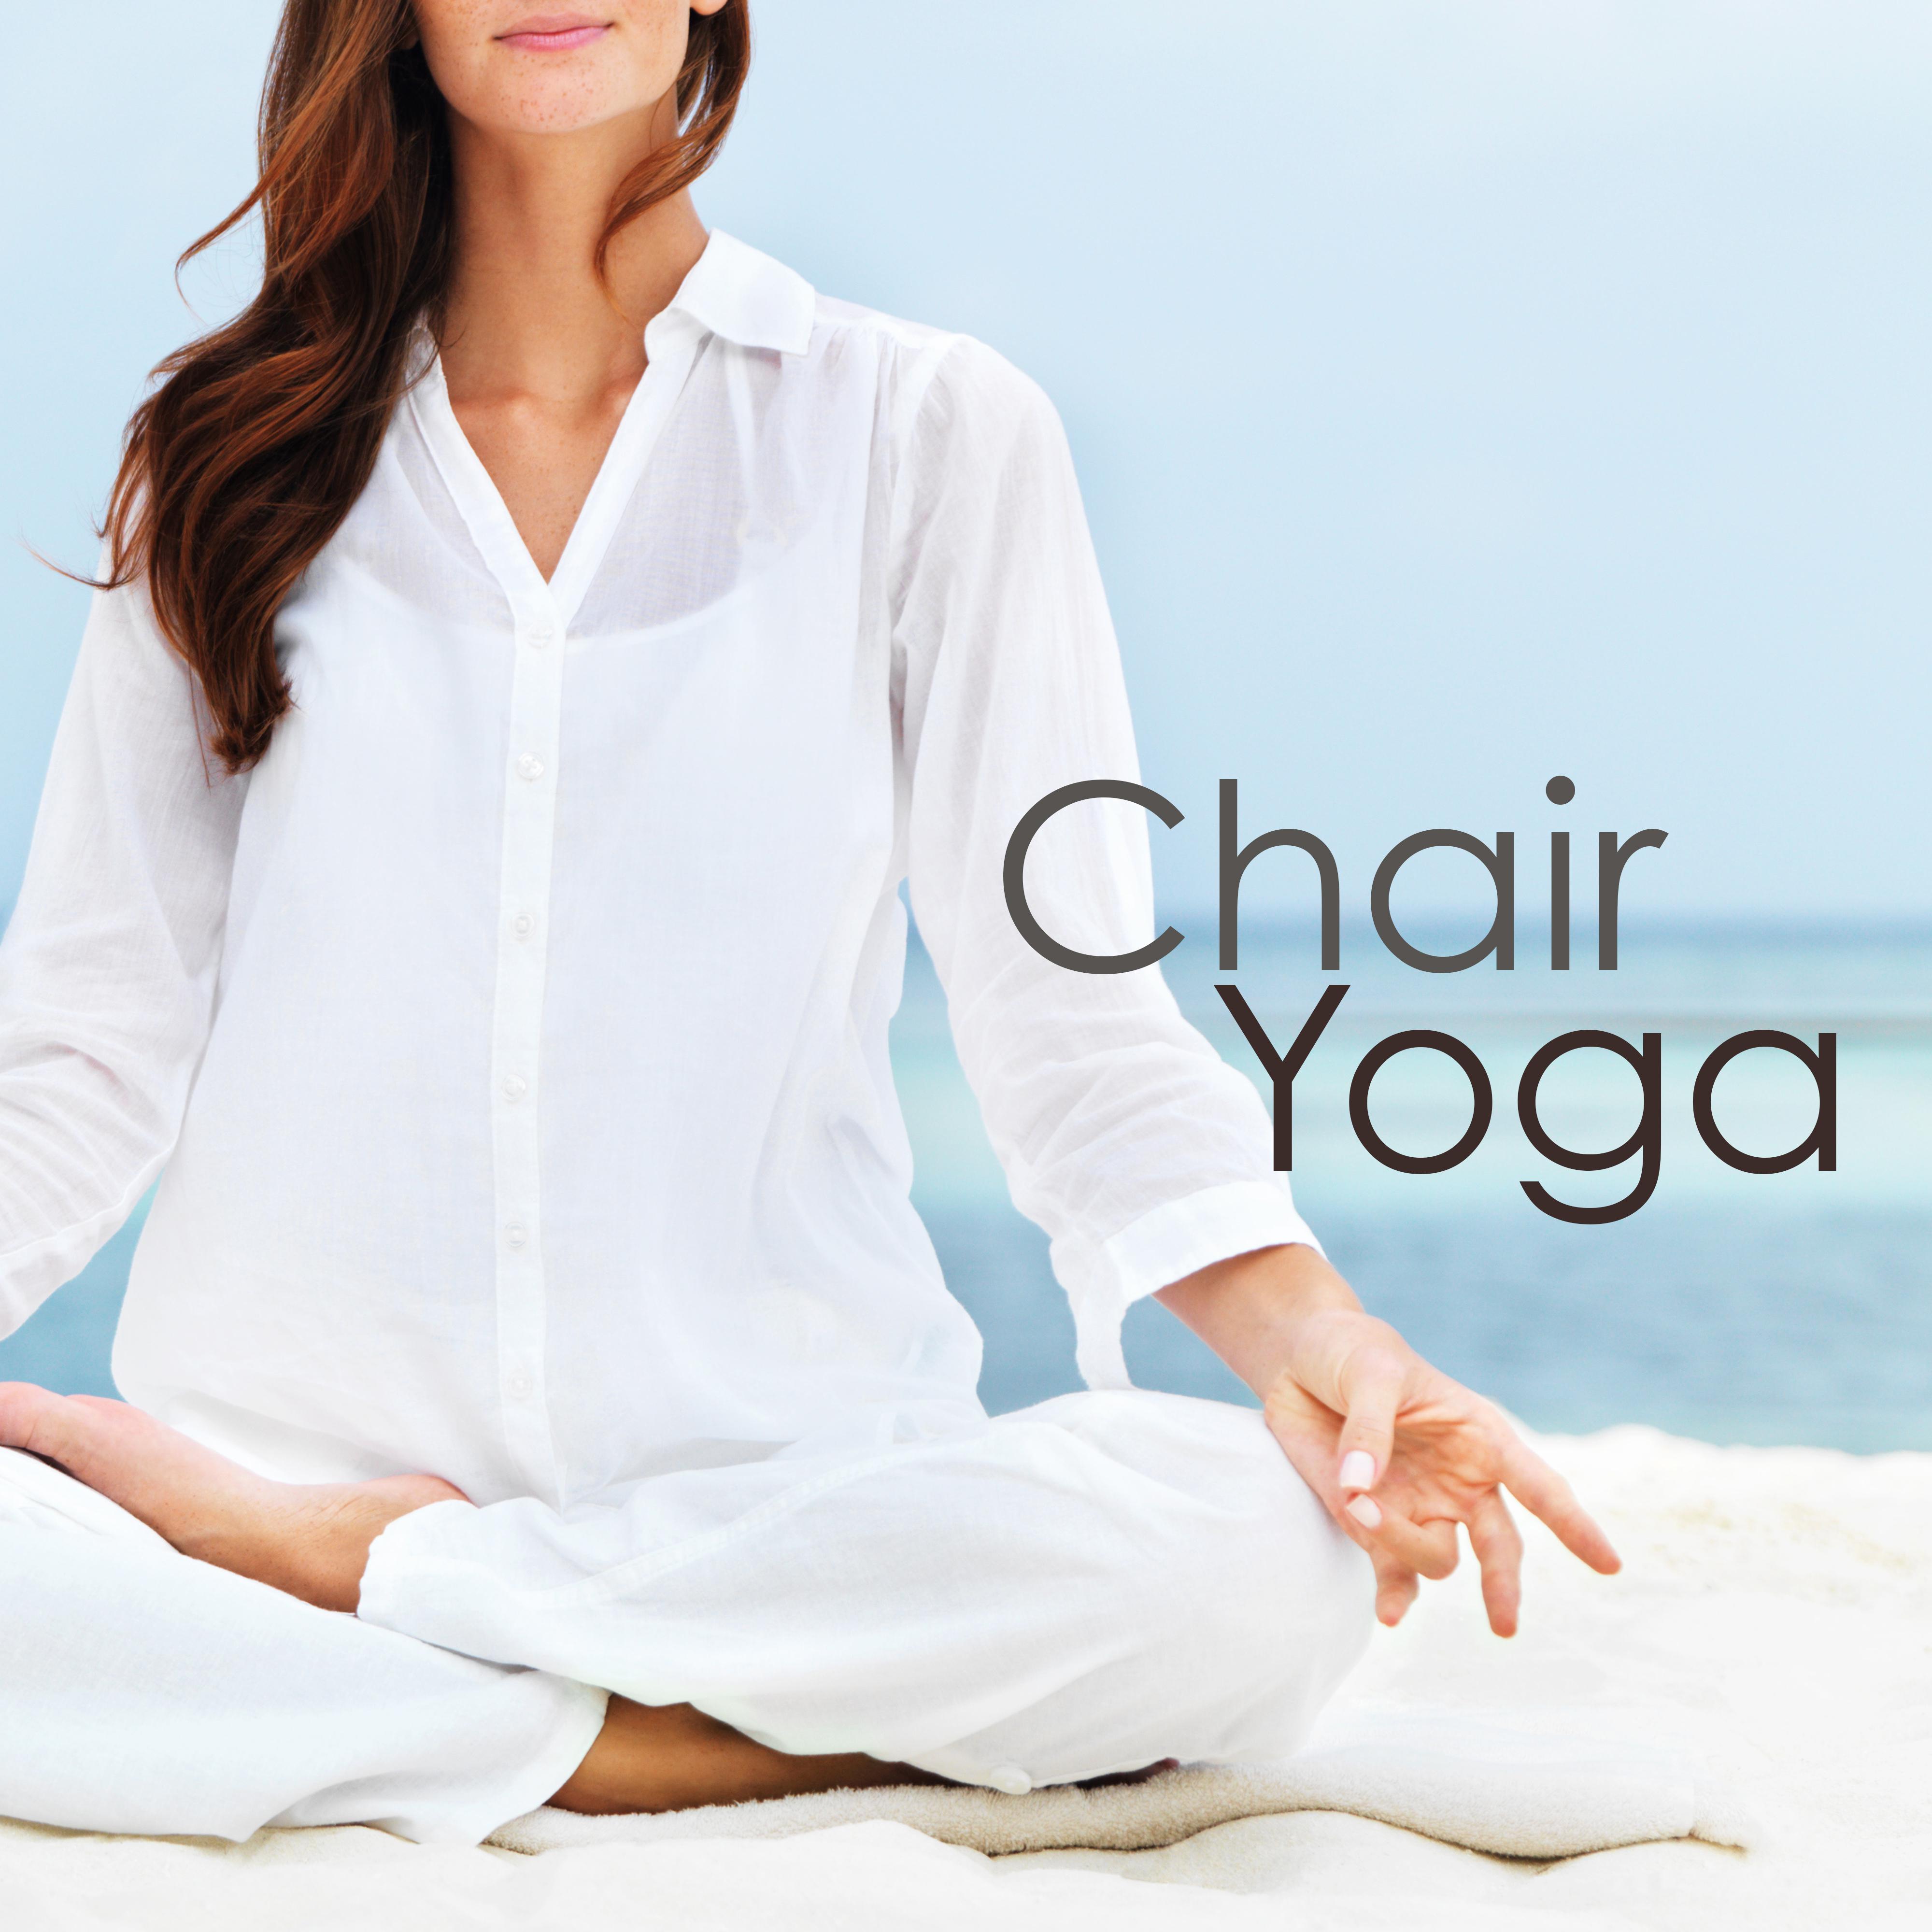 Chair Yoga - Chair Yoga Poses at Work to Reduce Stress, Yoga Music for a Clear Mind and a Balanced Body